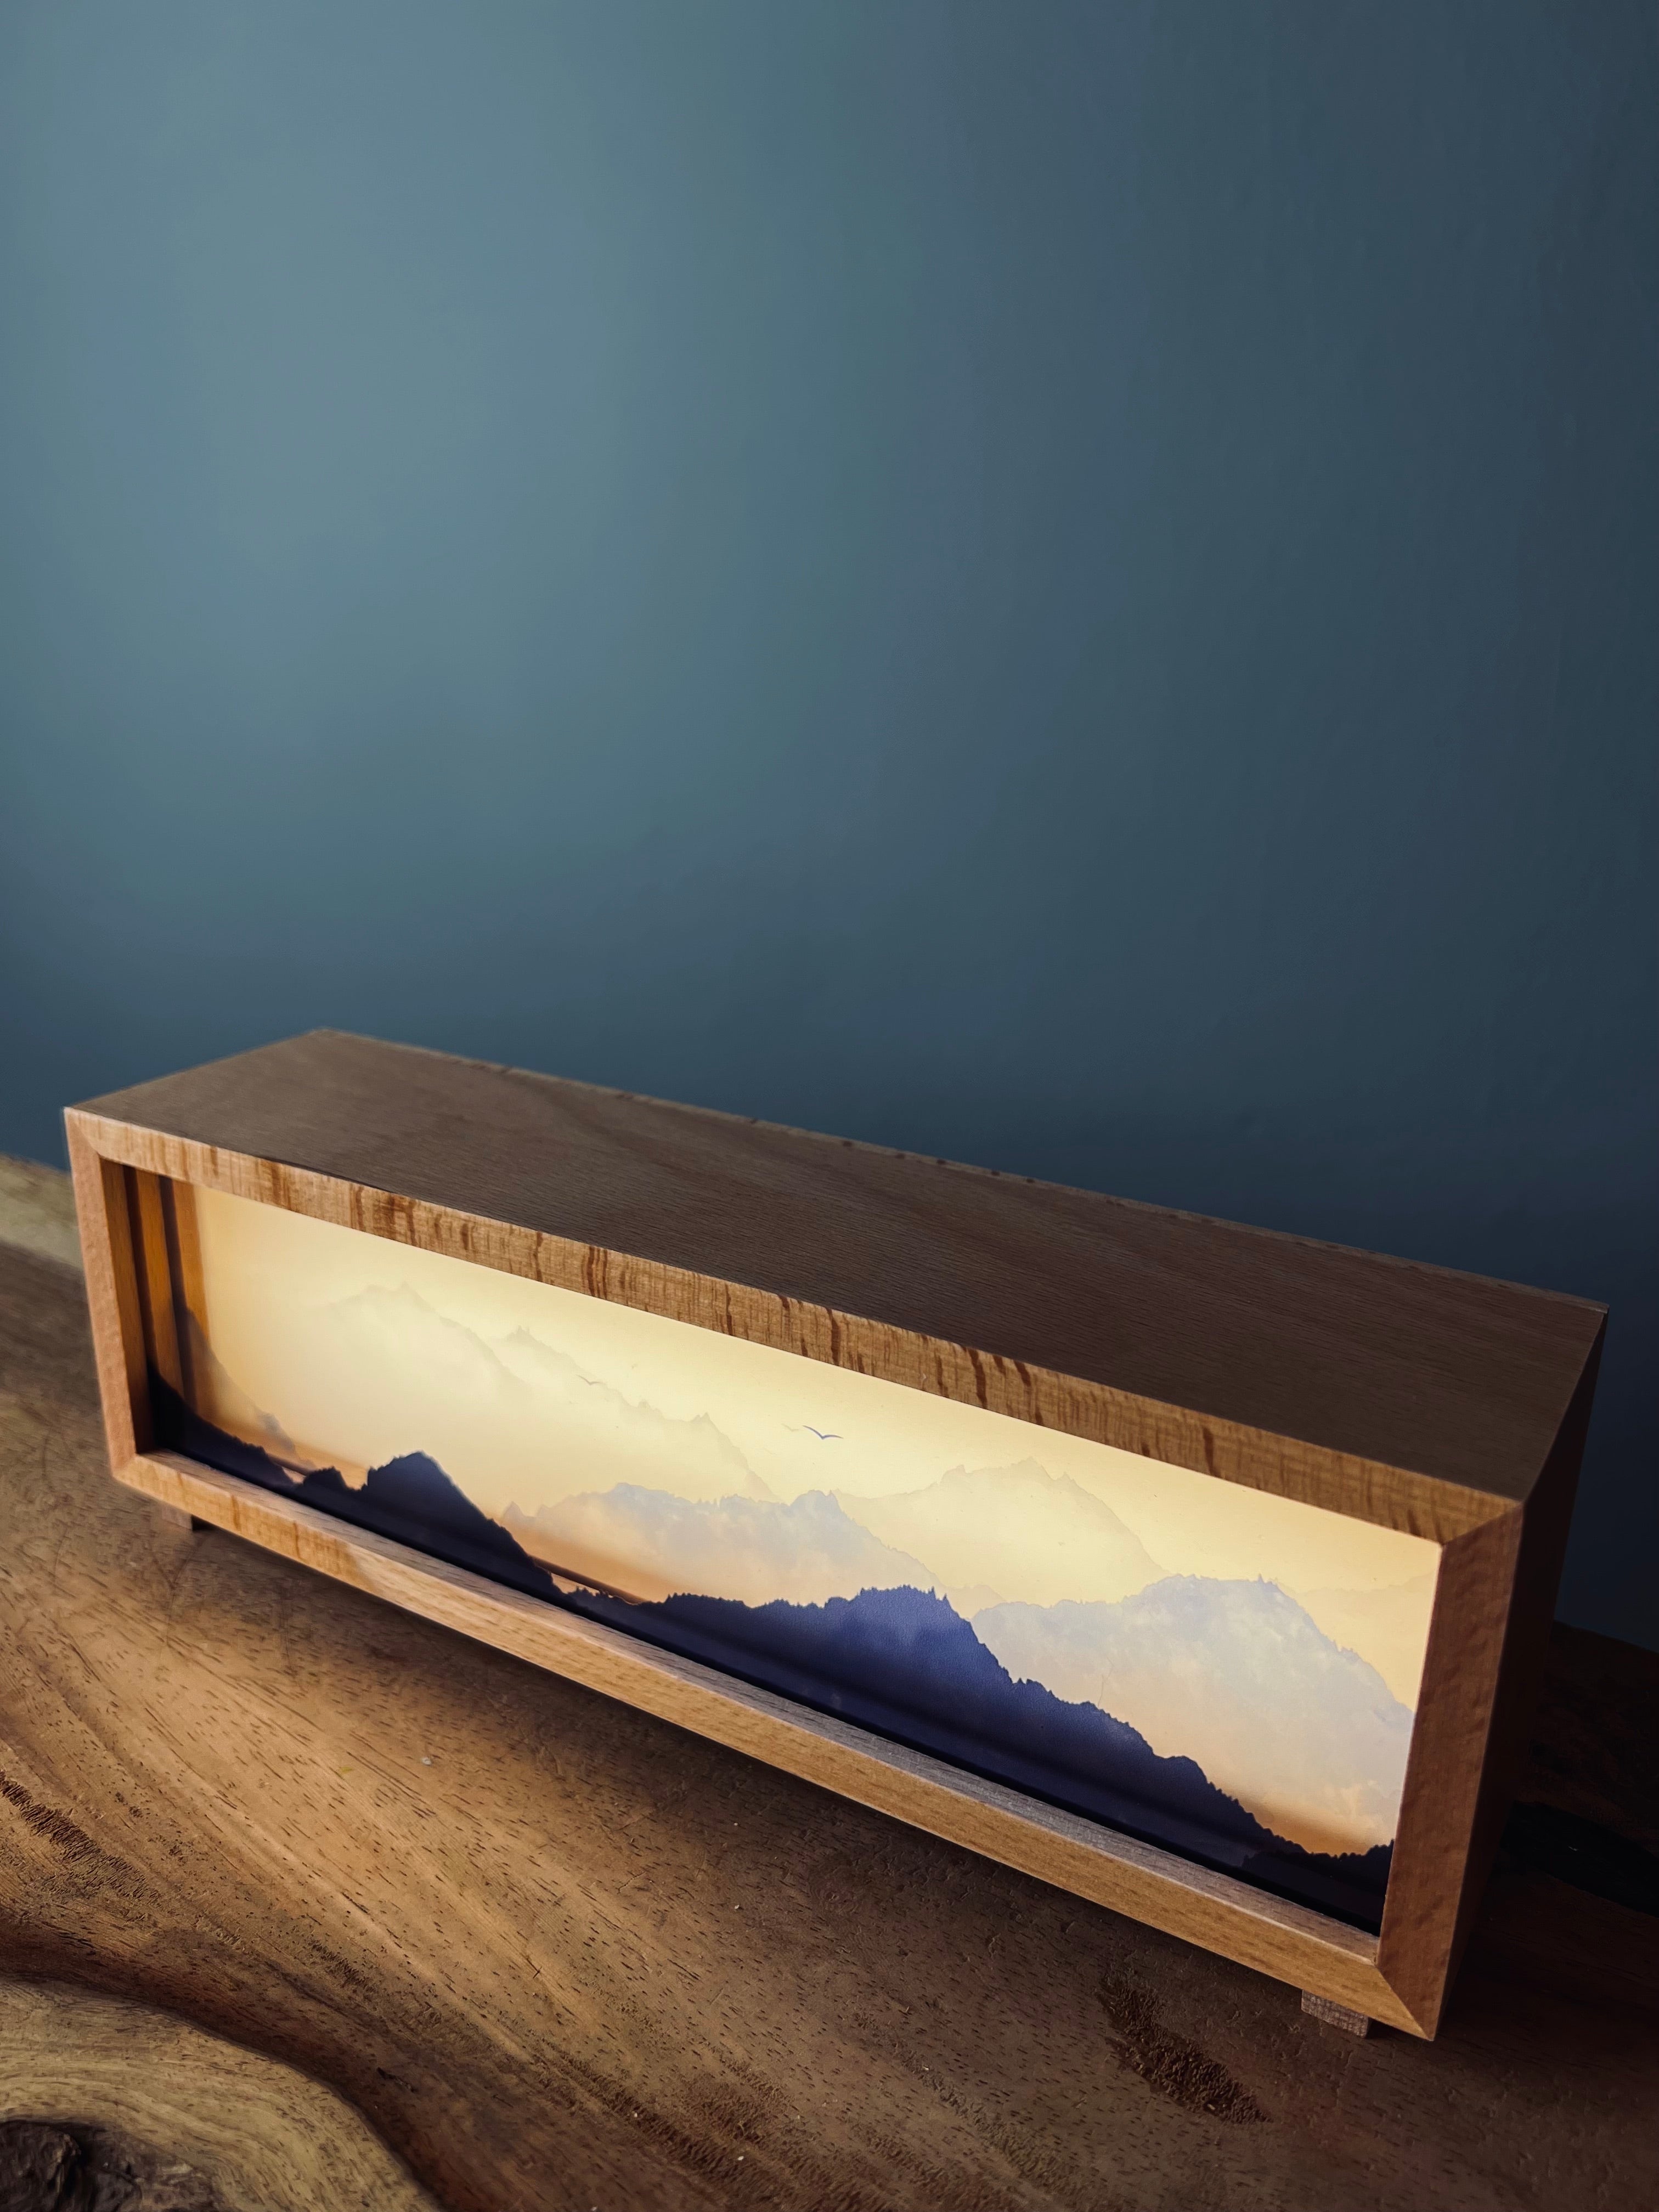 Display Ambient Light (Accessories)